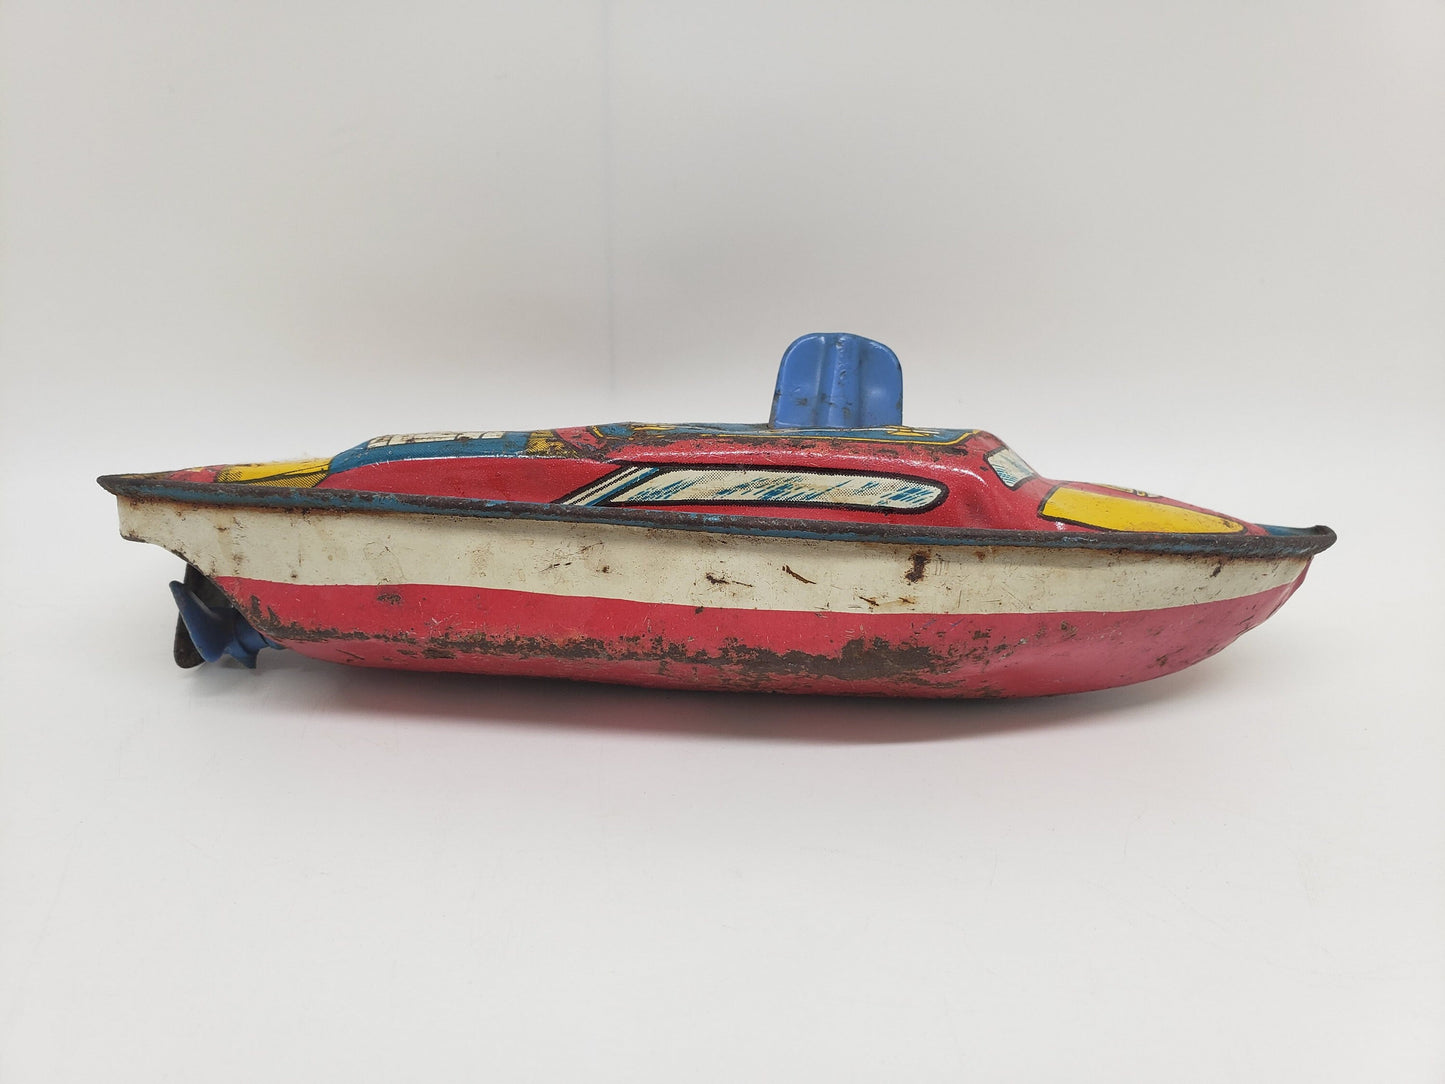 1950 Nautical Tin Boat Red Wind Up Toy Vintage Collectable Scale Model Metal Toy Ship Perfect Birthday Gift